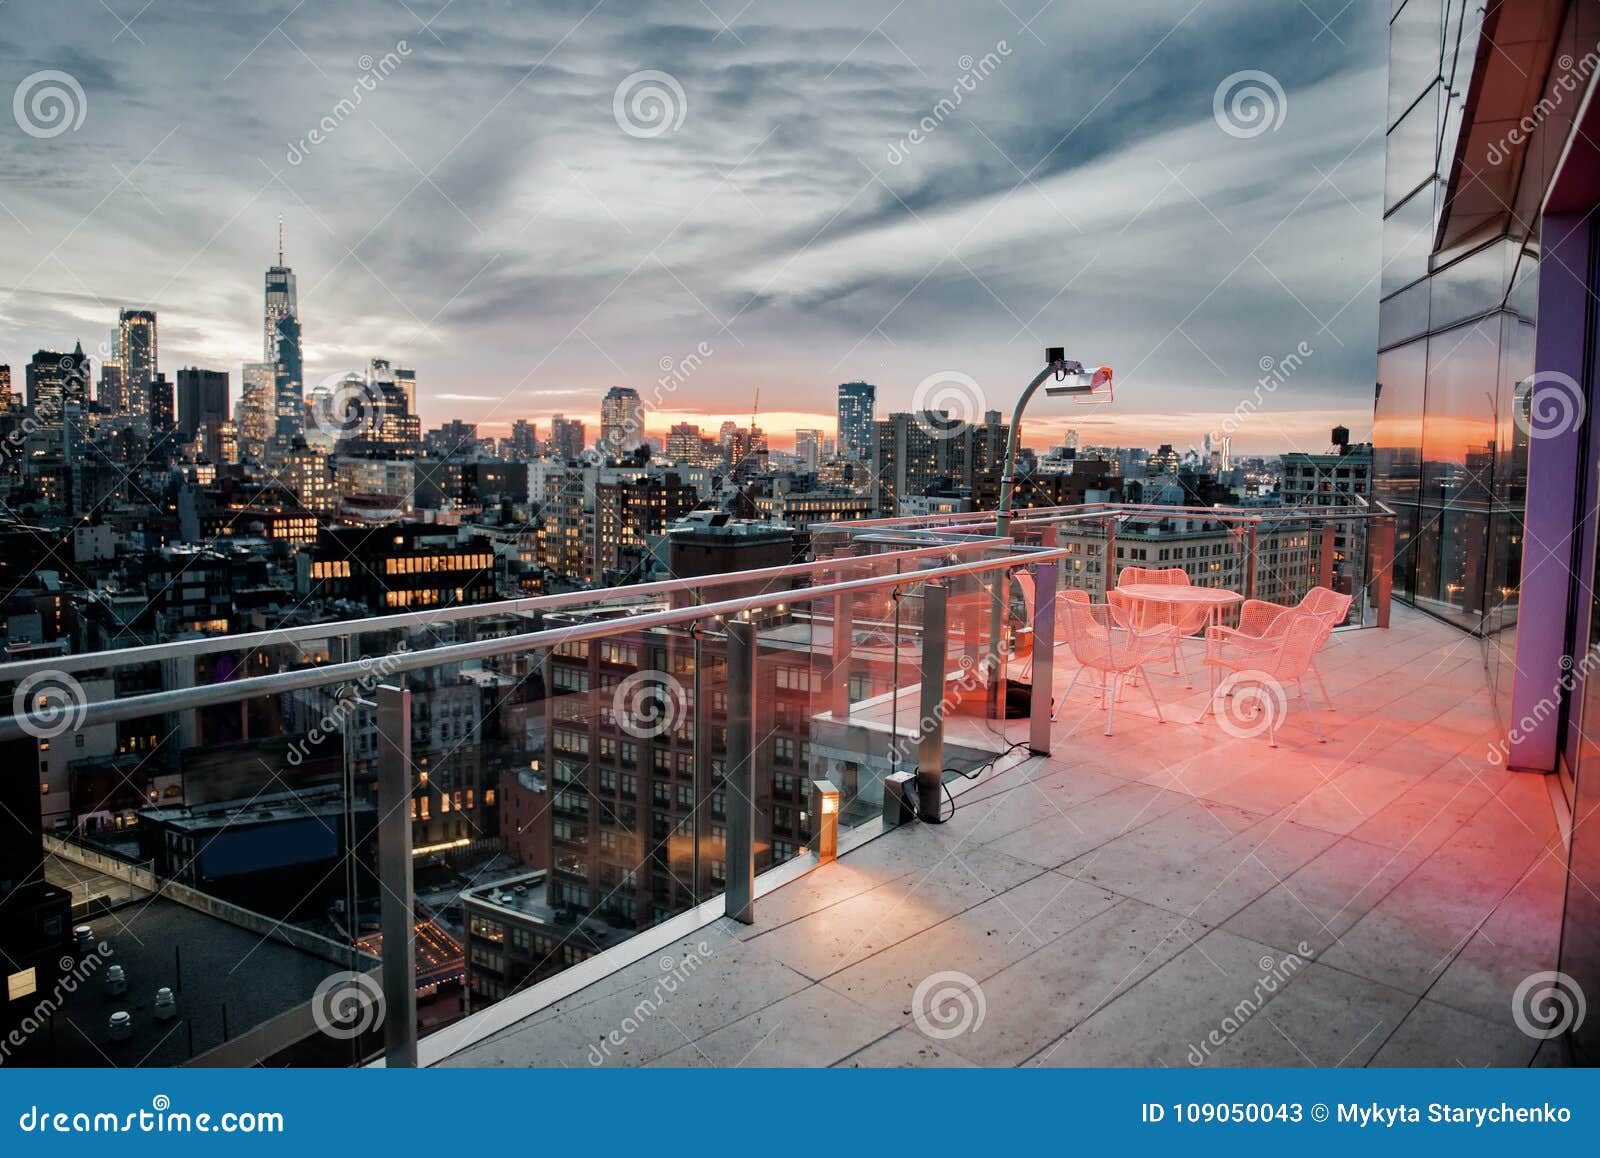 luxury city rooftop balcony with chilling area in new york city manhattan midtown. elite real estate concept.